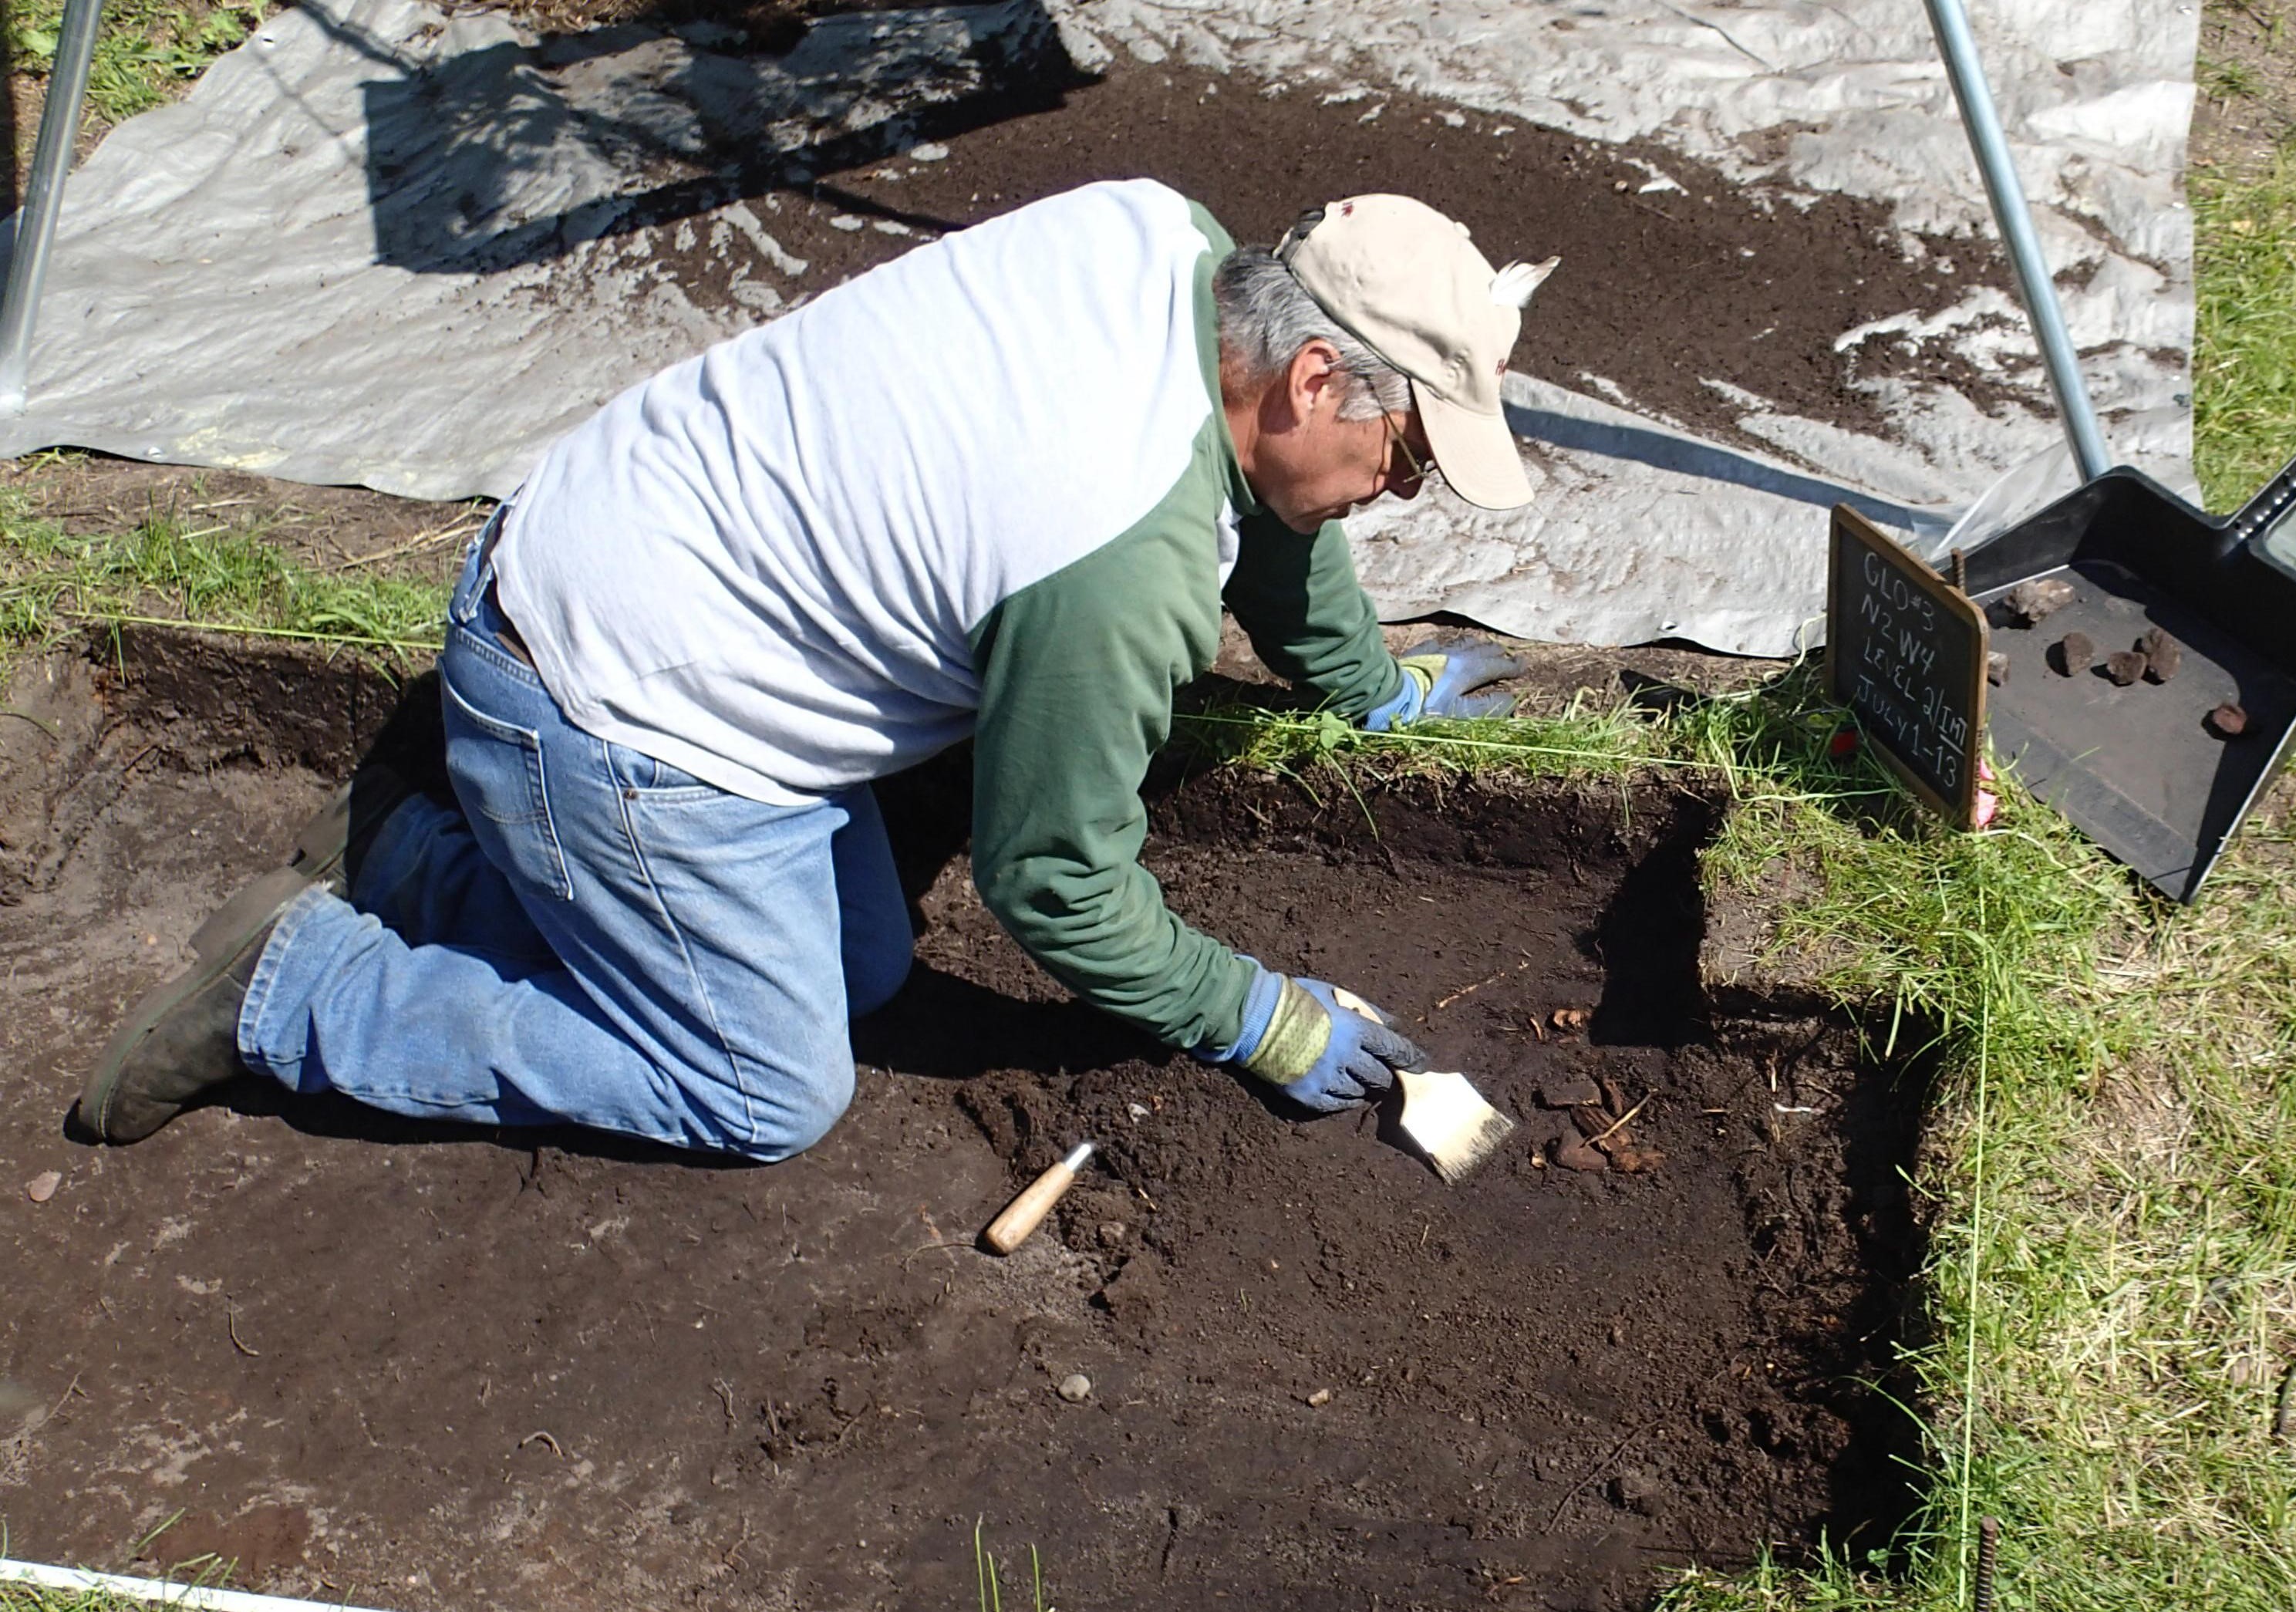 Paquette at work on an excavation.